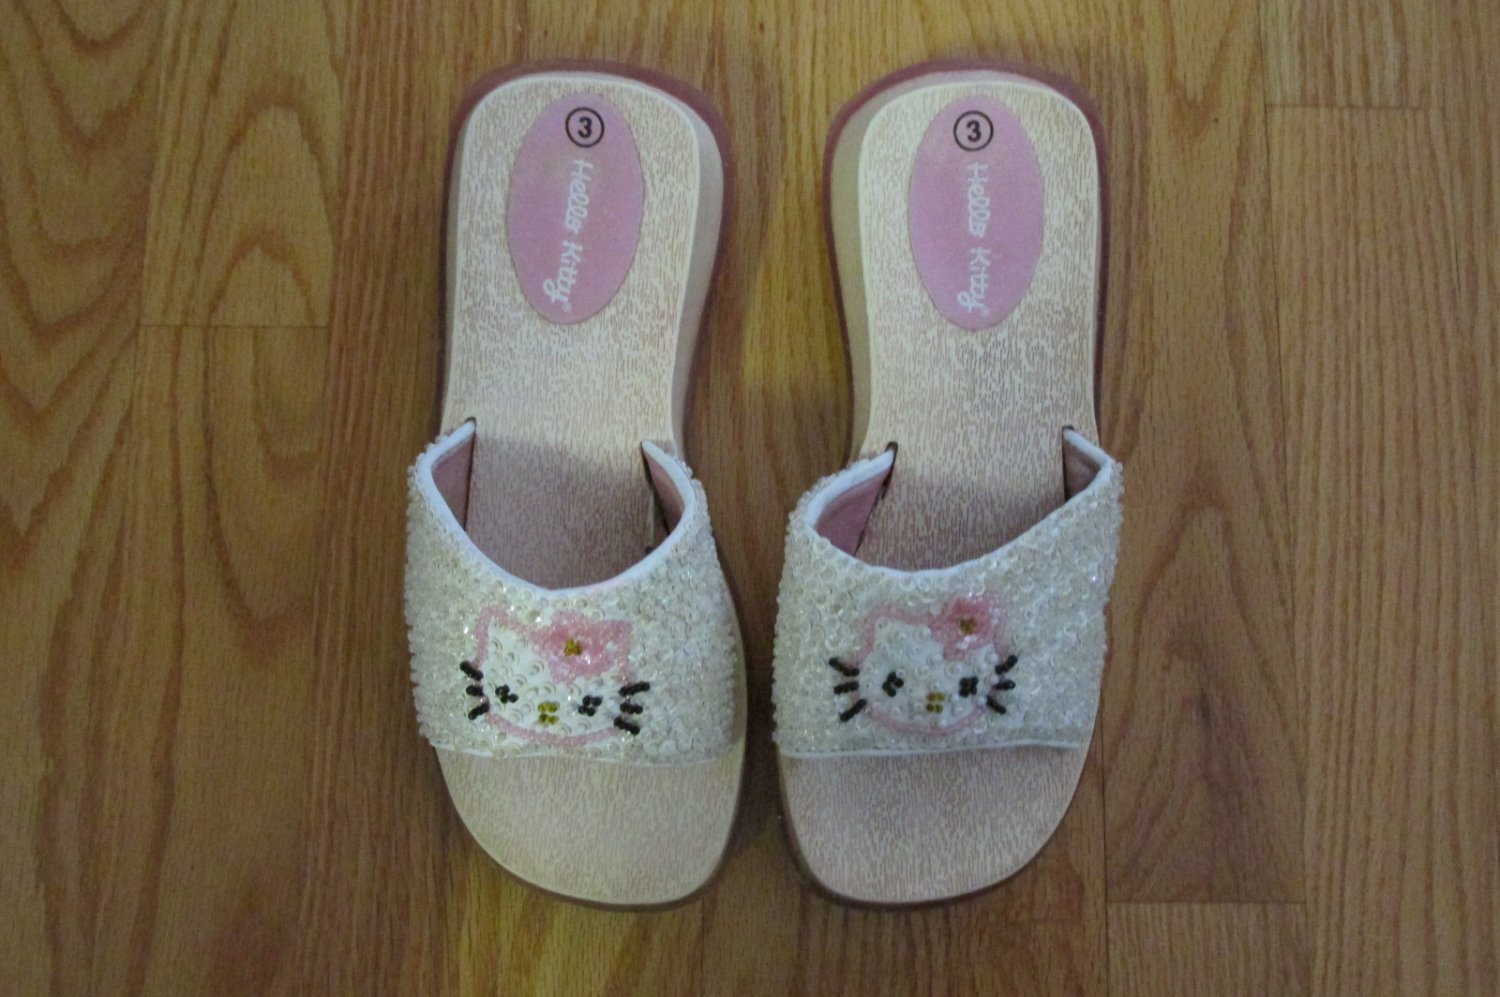 HELLO KITTY GIRL'S SIZE 3 SHOES WHITE IRIDESCENT & PINK SEQUINS & BEADS SANDALS SLIDES